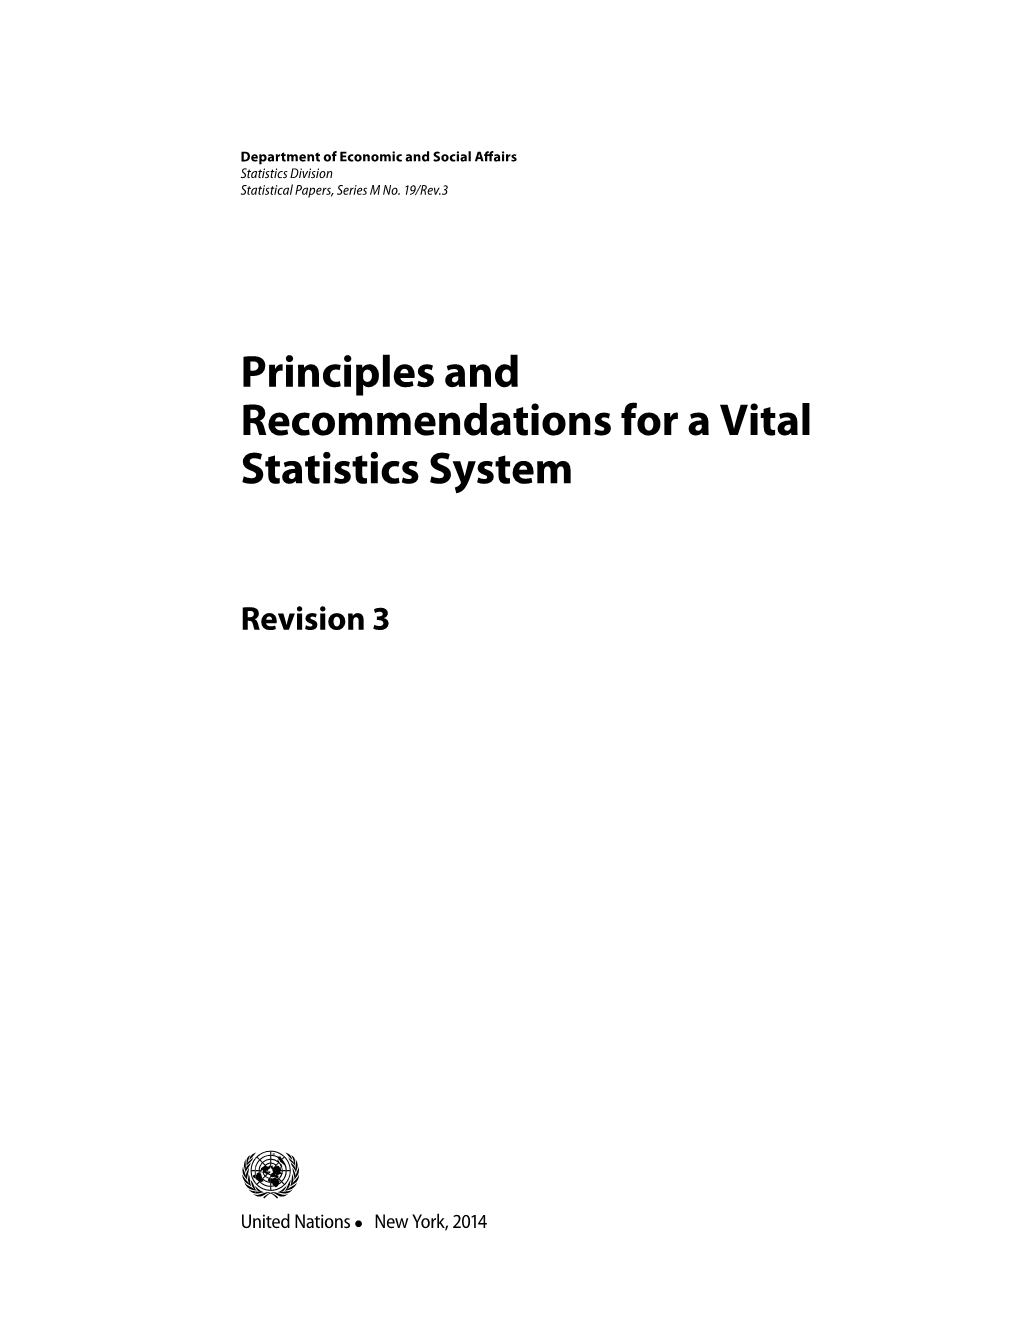 Principles and Recommendations for a Vital Statistics System